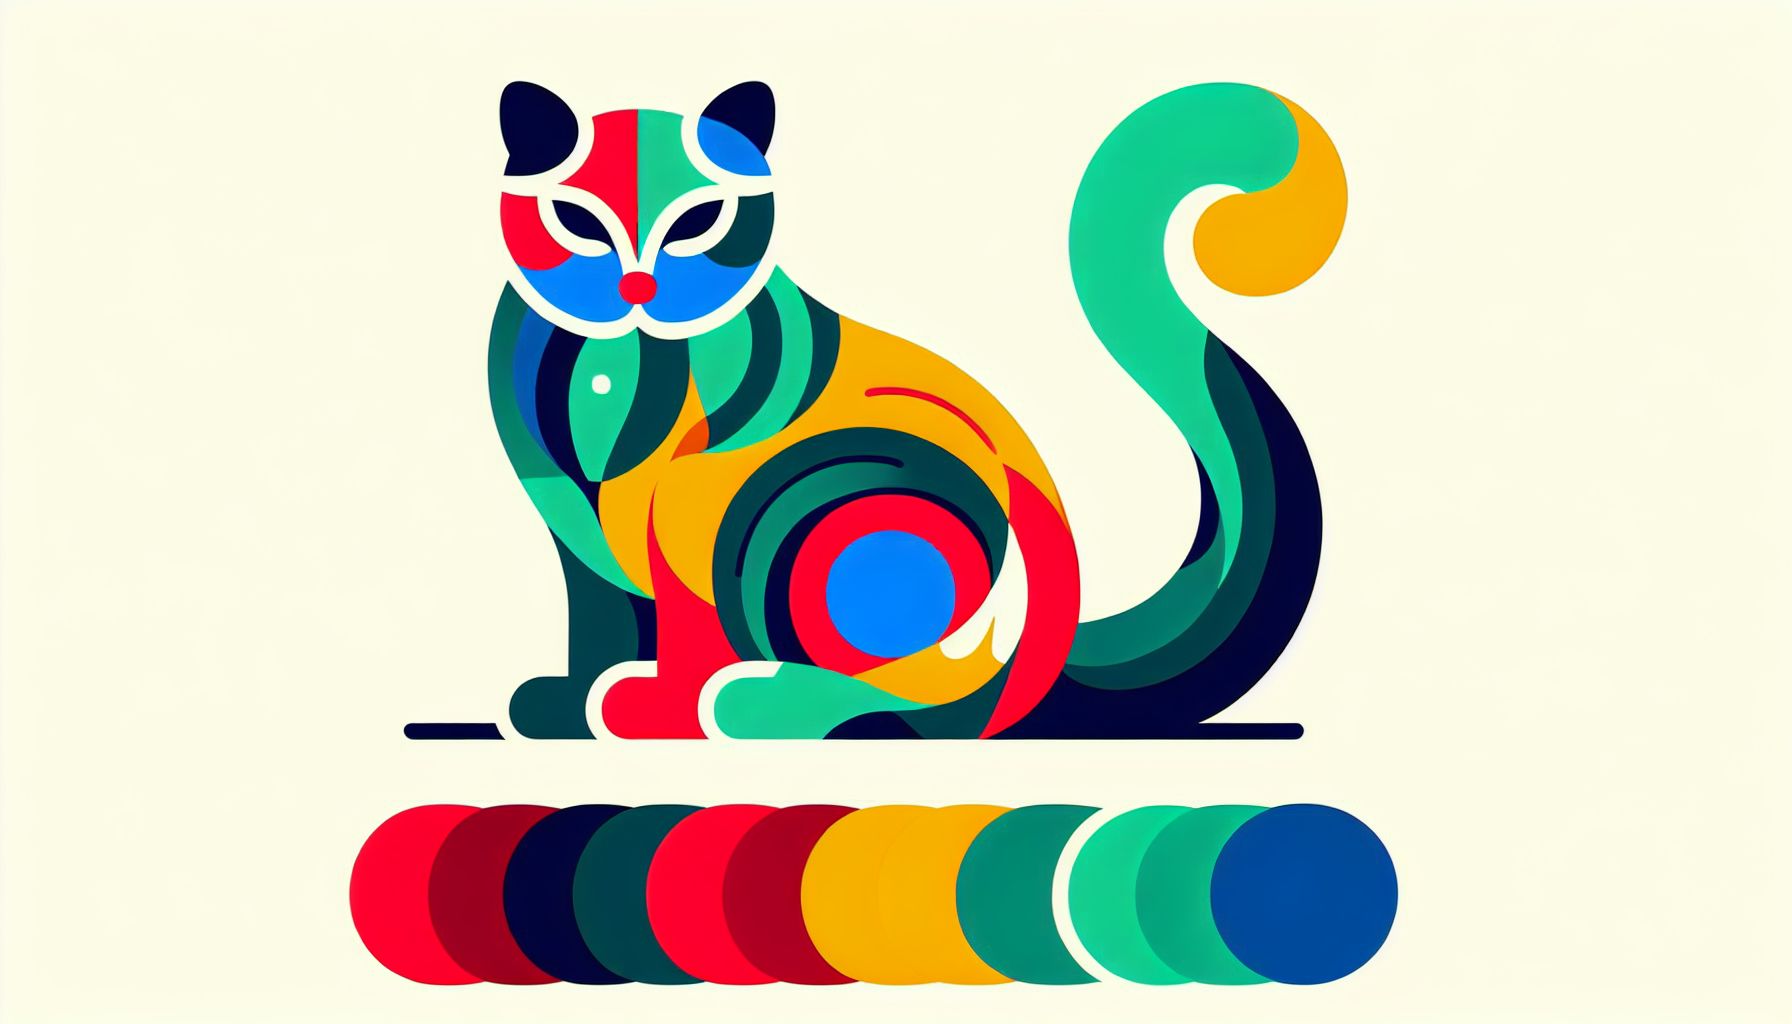 Cat in flat illustration style and white background, red #f47574, green #88c7a8, yellow #fcc44b, and blue #645bc8 colors.